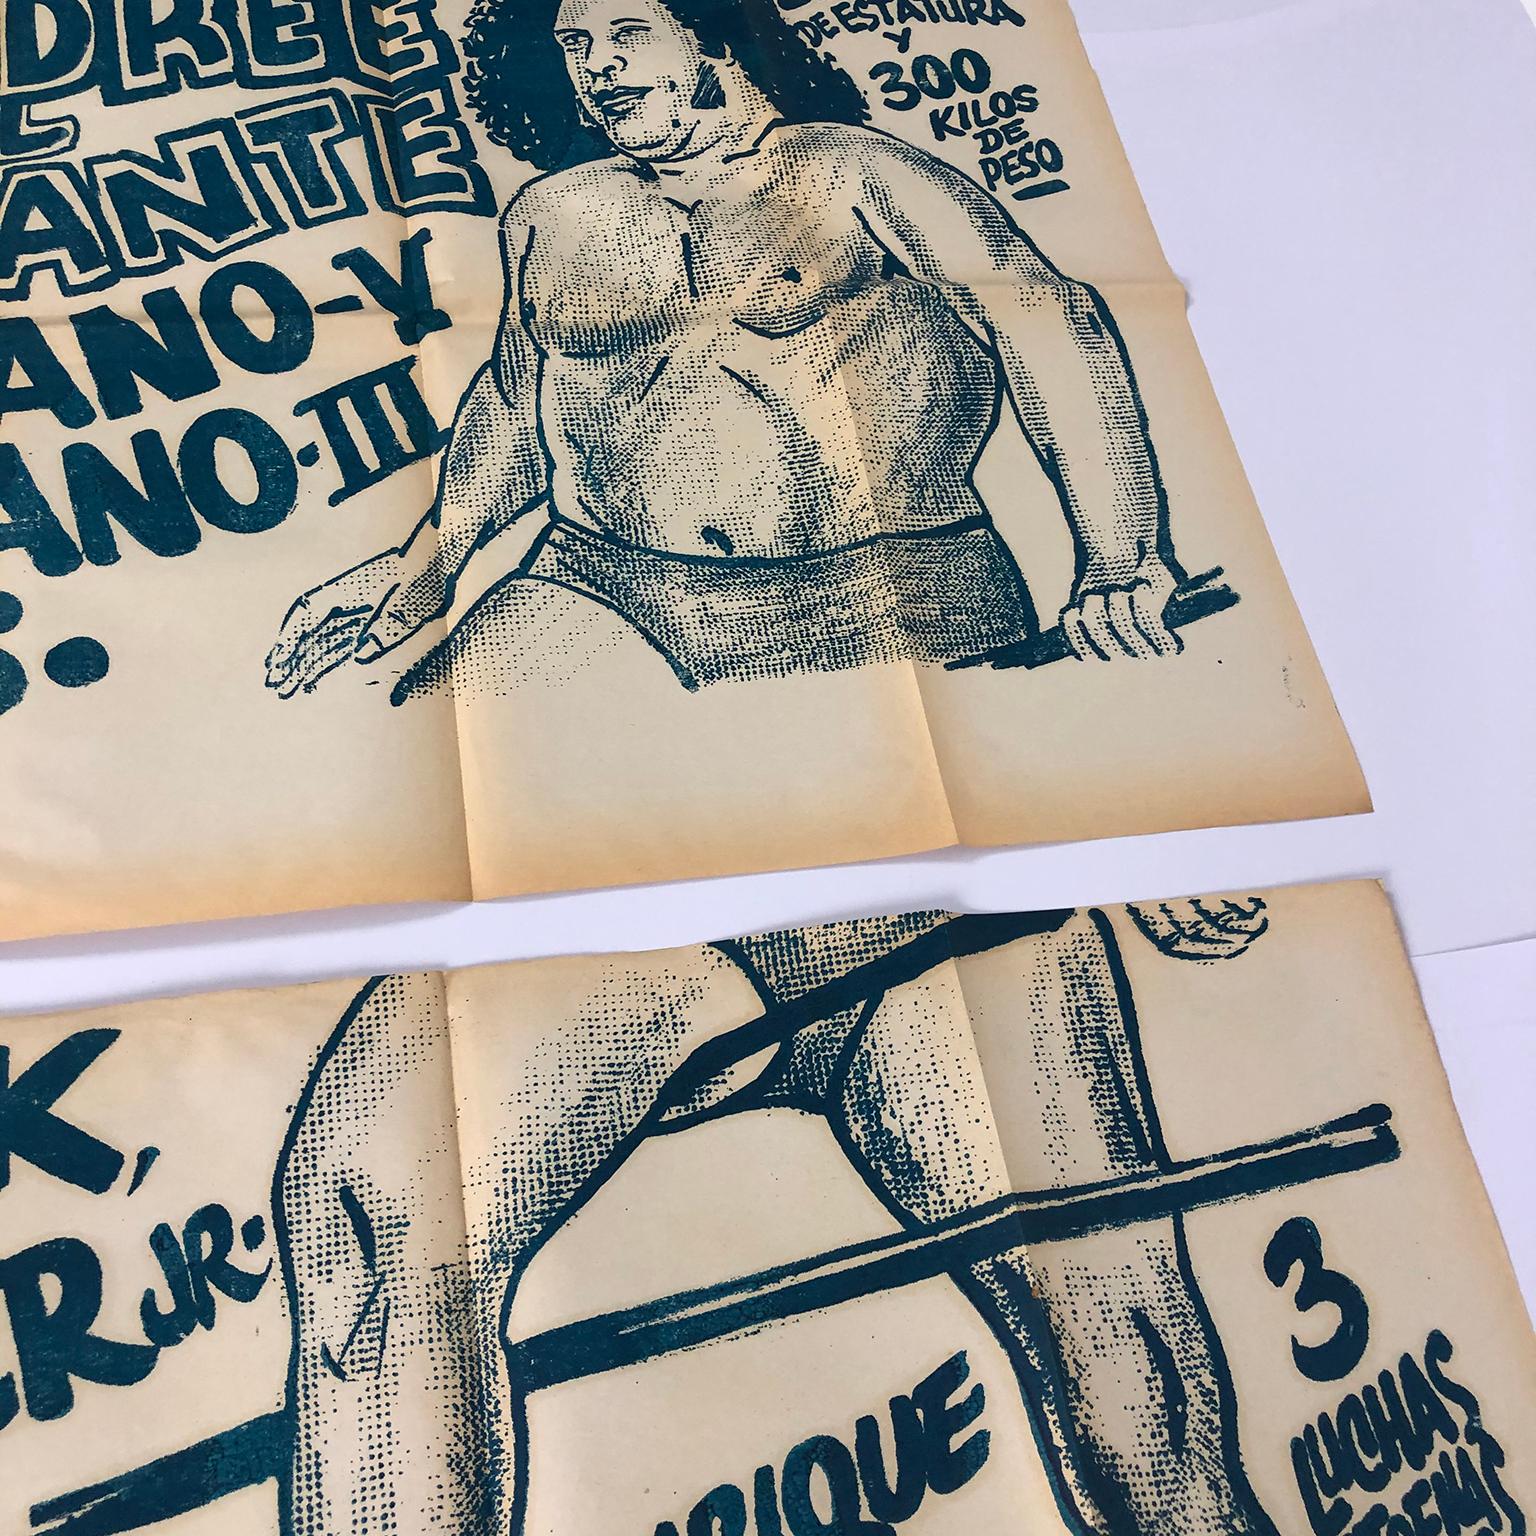 andre the giant peso